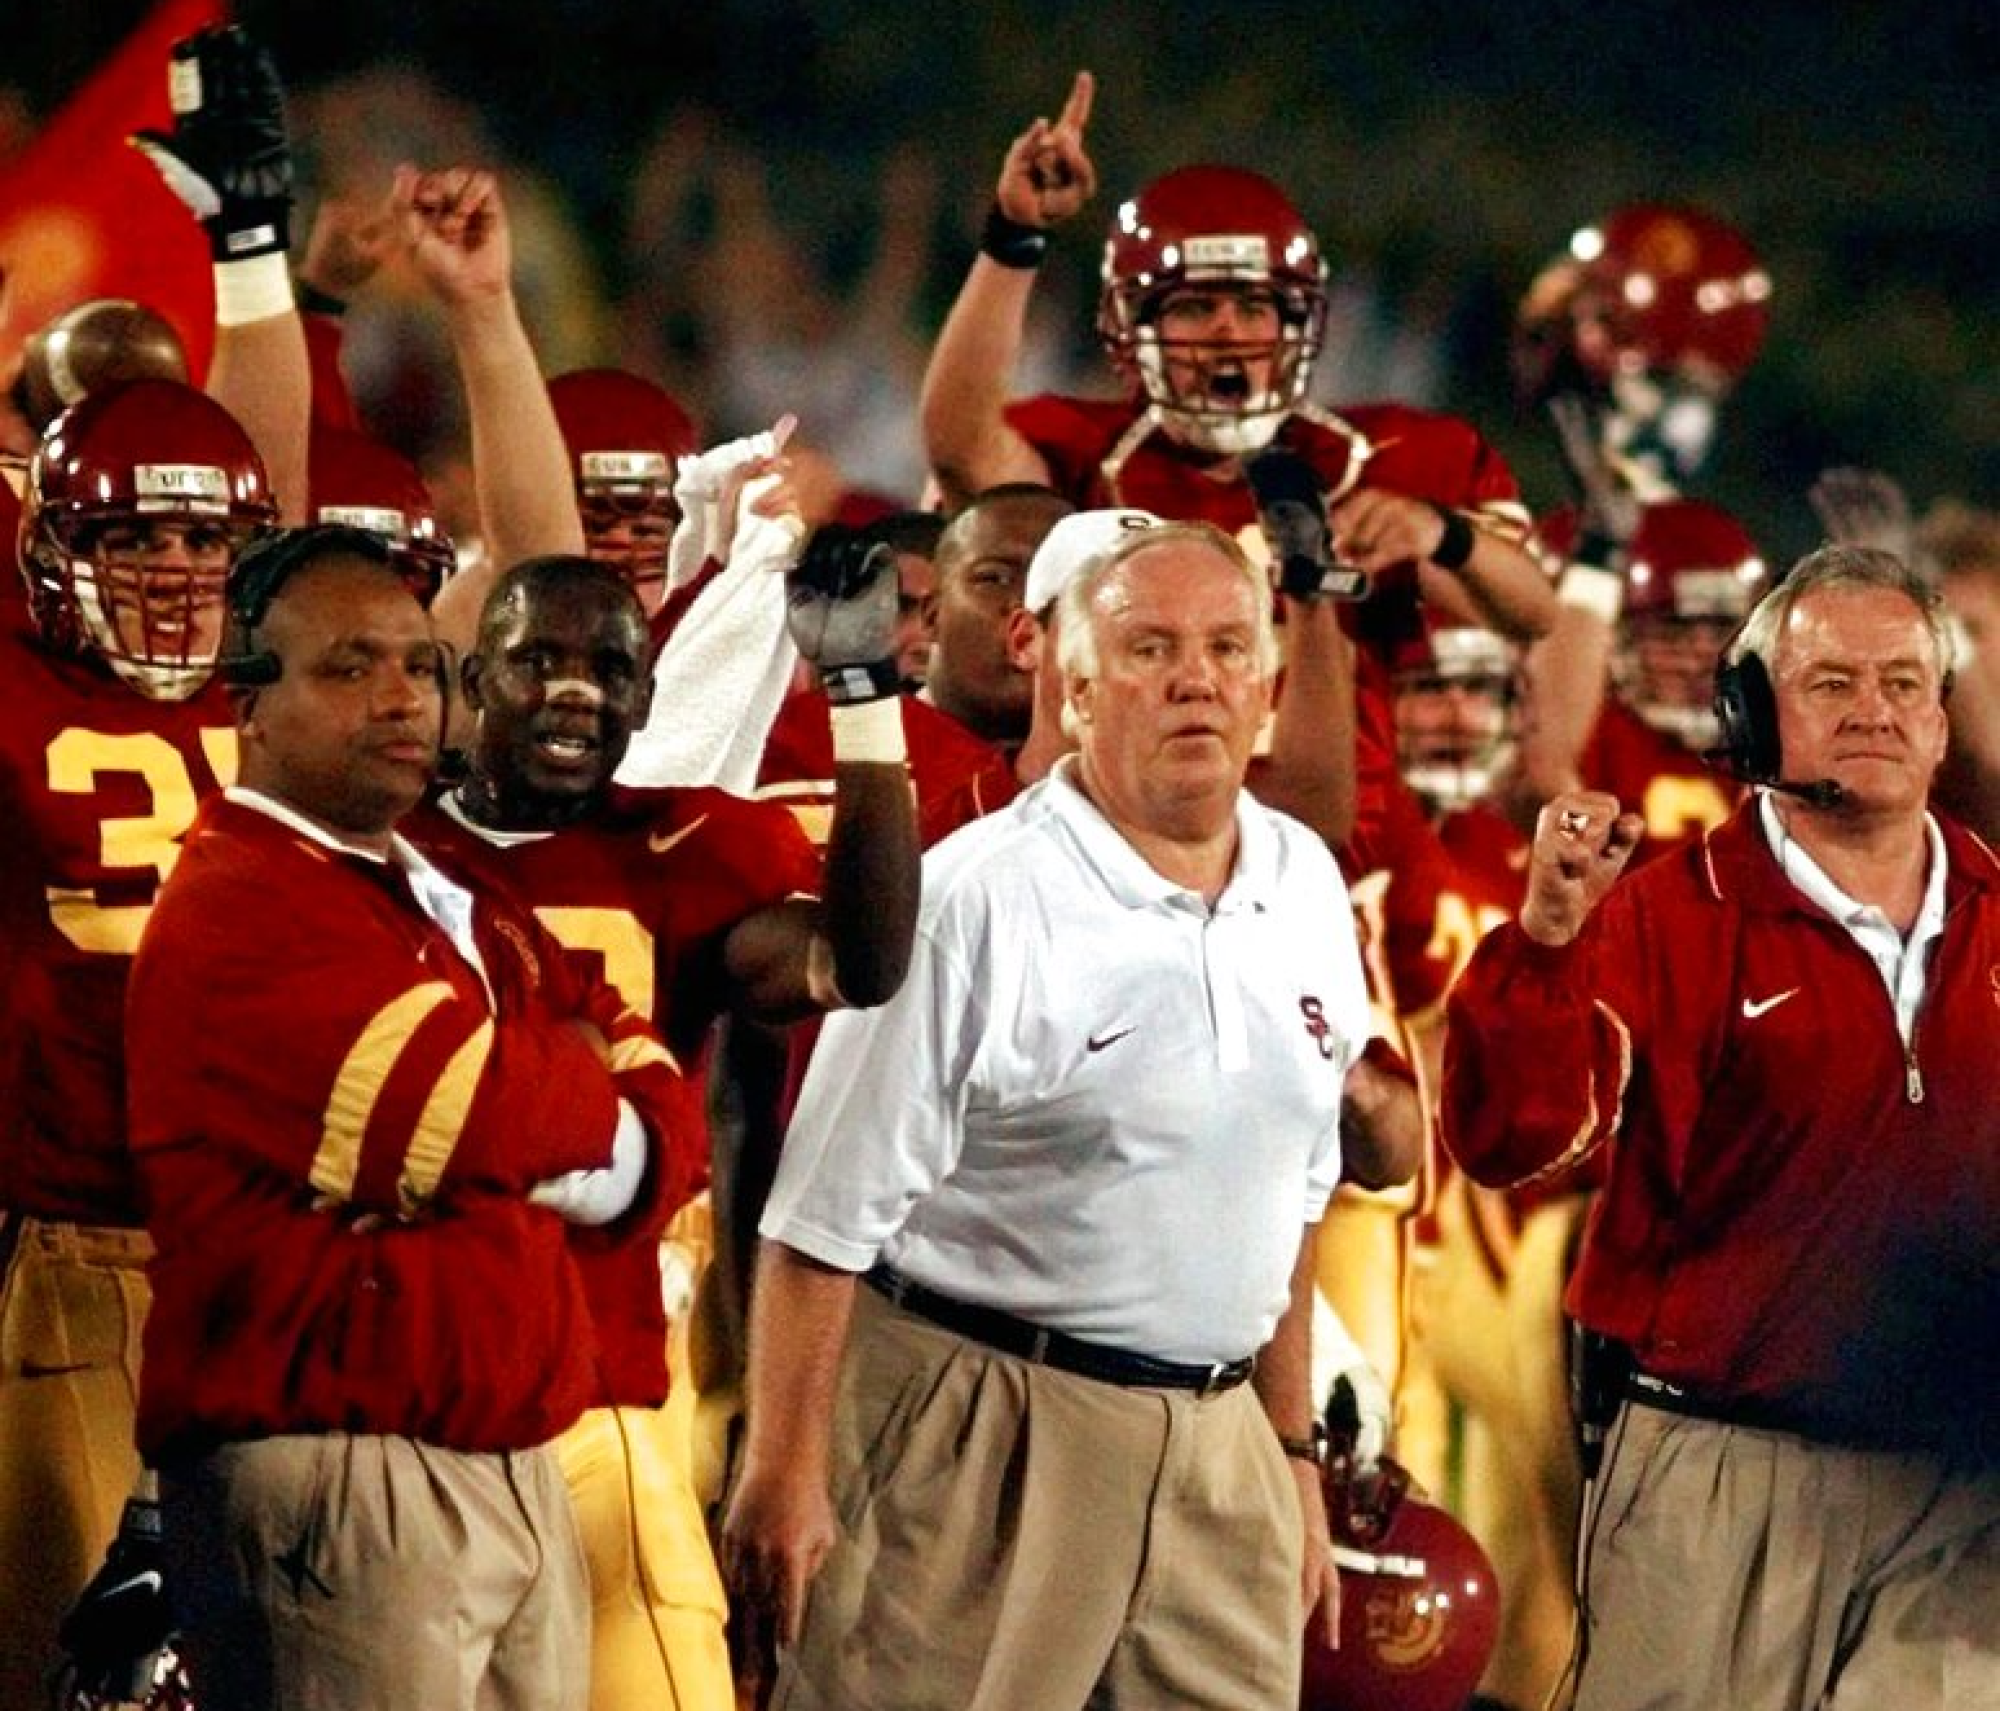  John Robinson watches his USC team intently from the sidelines in 1997.